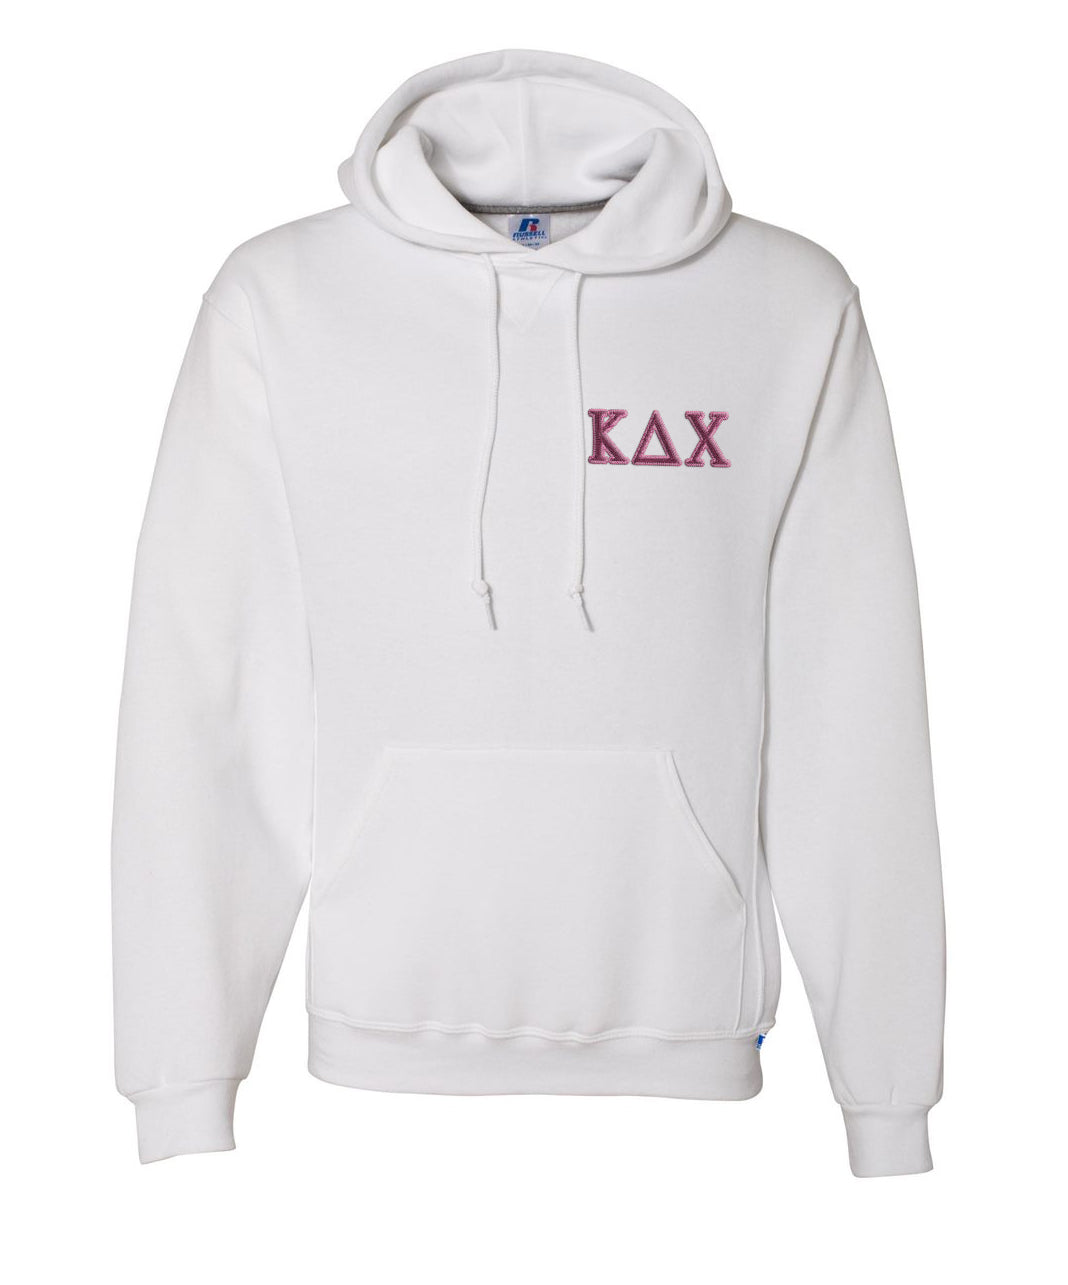 Kappa Delta Chi Embroidered Hoodie